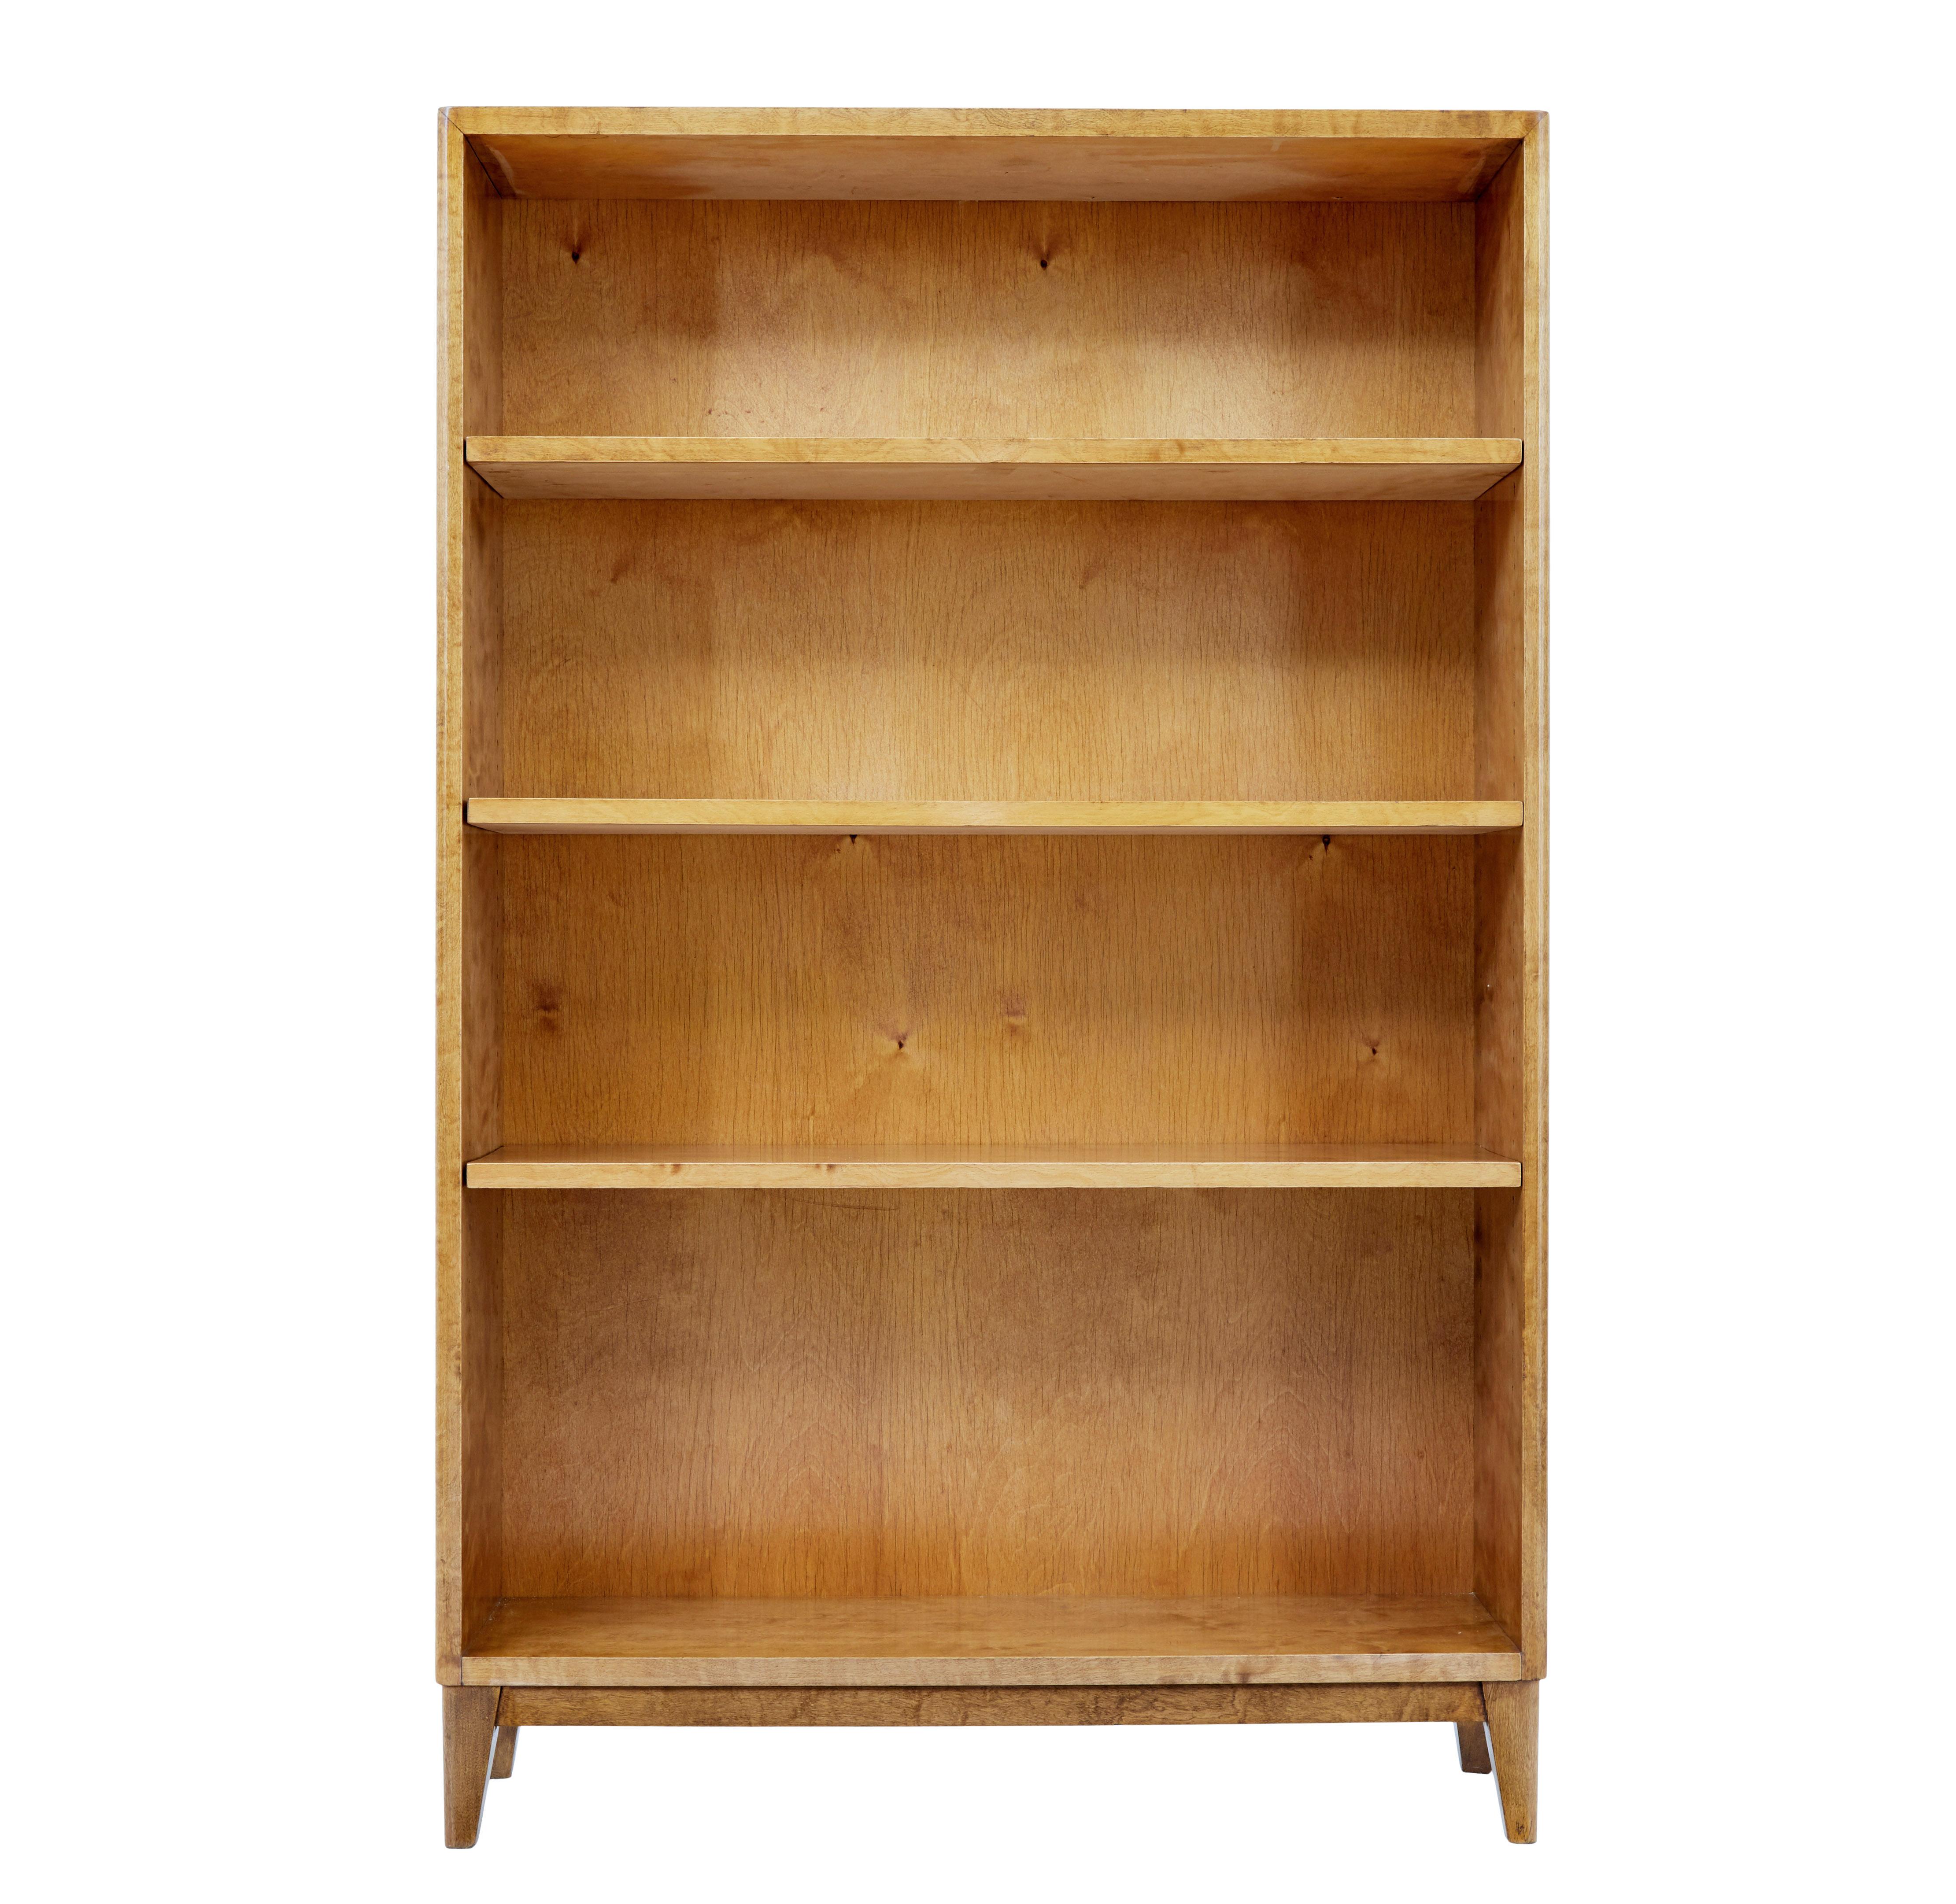 Mid century Swedish birch open bookcase circa 1950.

Elegant piece of mid 20th century Scandinavian design.  Rich golden birch veneers around the top and sides.  Fitted with 3 fully adjustable shelves, ideal for book or ornament storage.

Standing